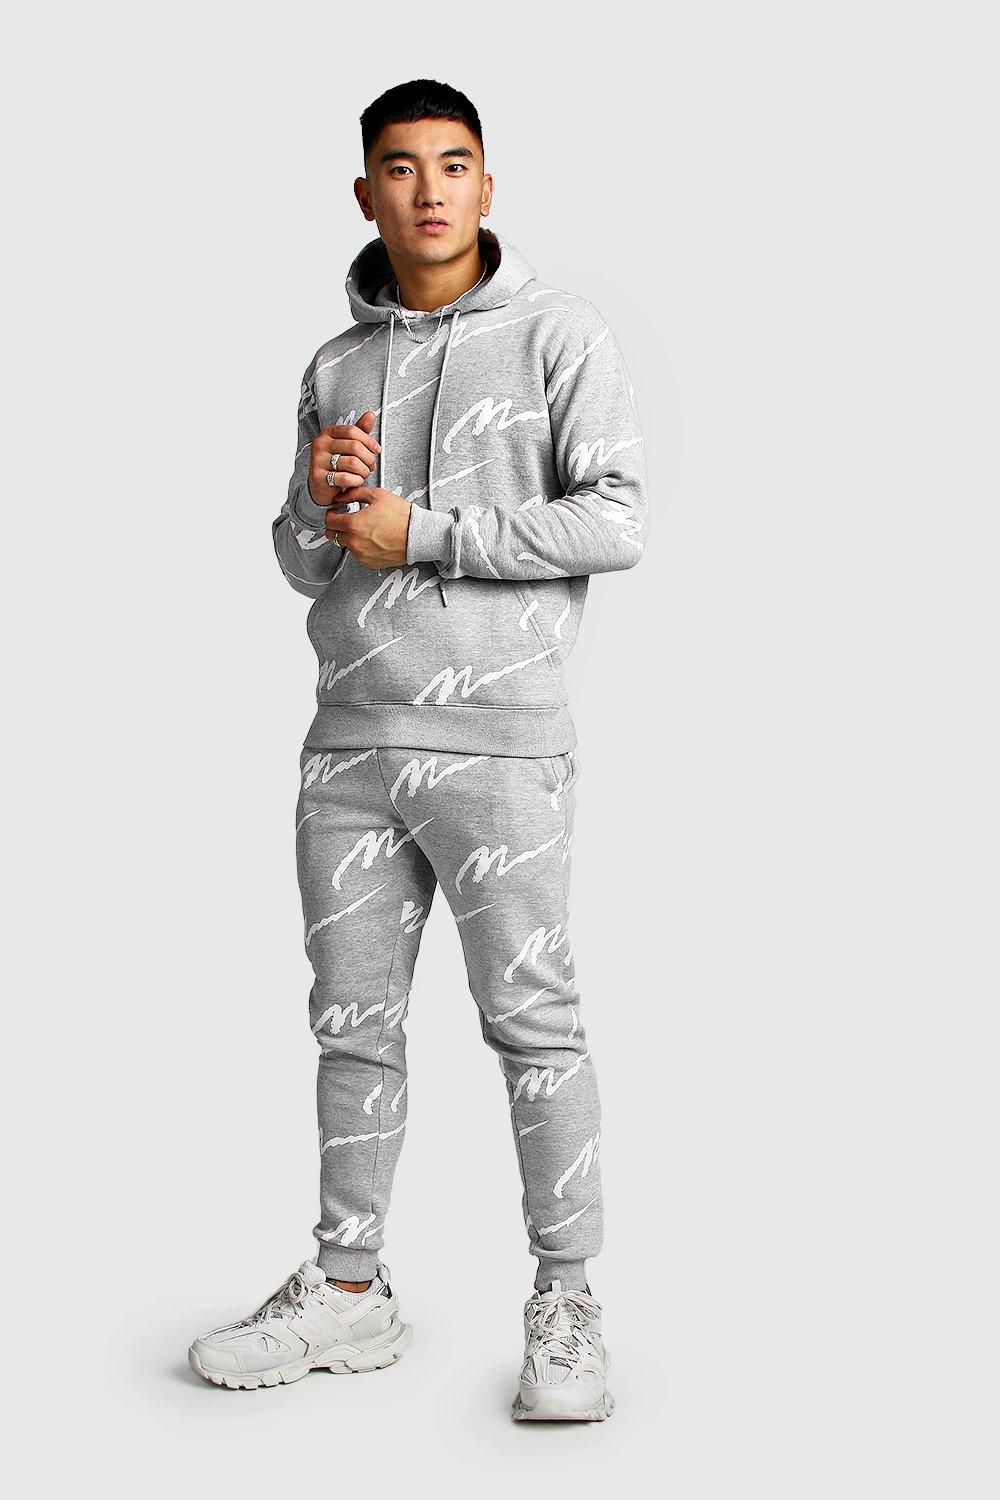 all tracksuit